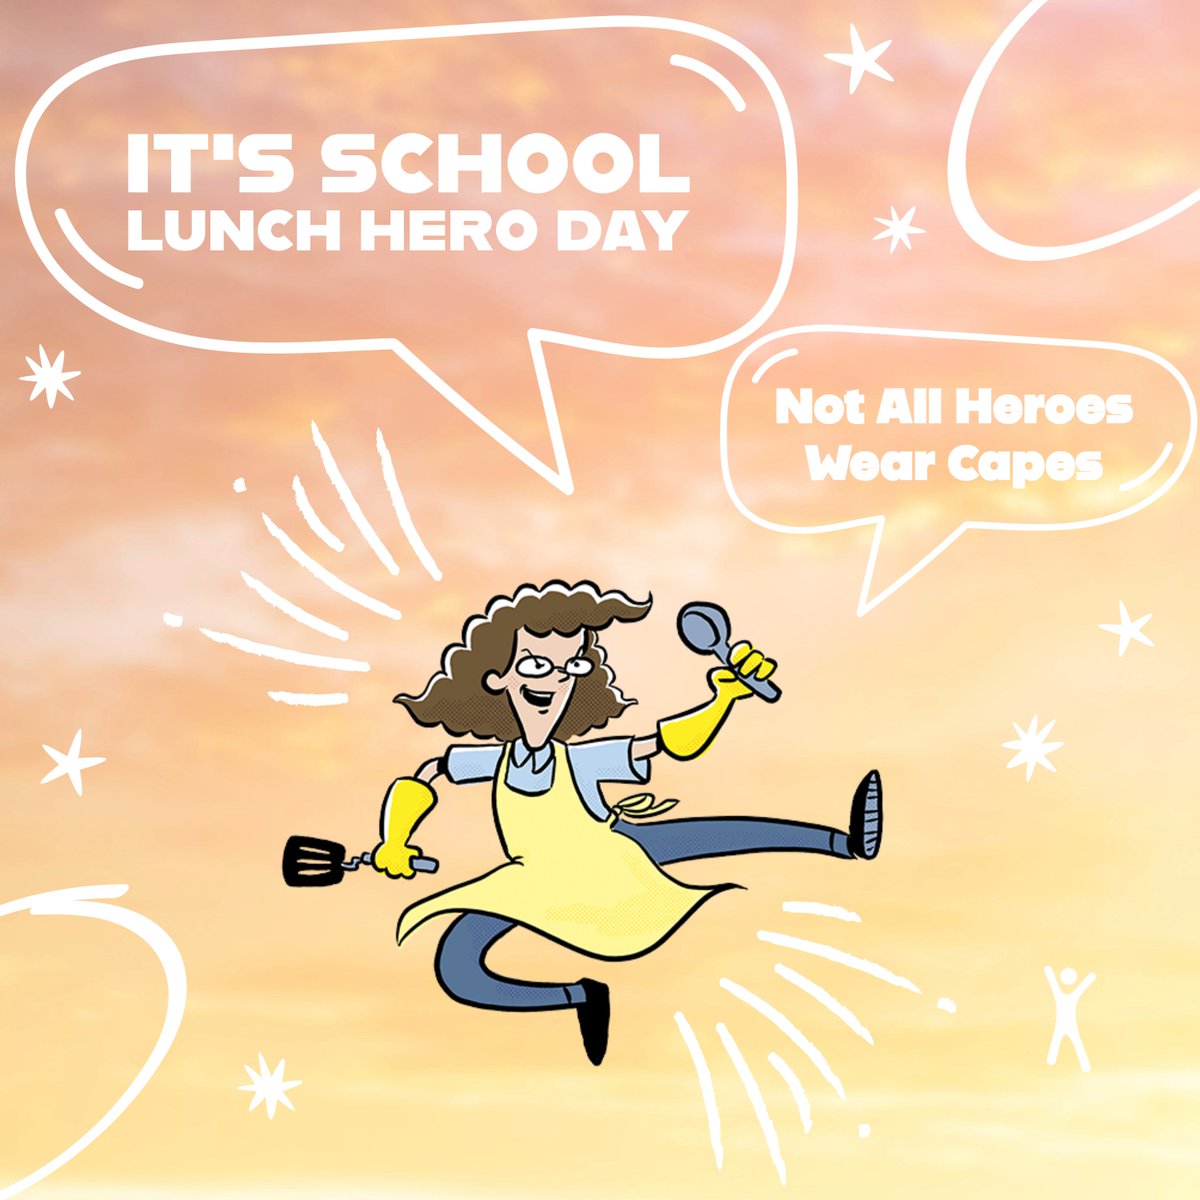 Stop by your nearest #PowerUpCafe to see the love and care our school lunch heros put into preparing healthy meals for students—all the while adhering to strict nutrition standards, navigating student food allergies, and doing it all with a smile.